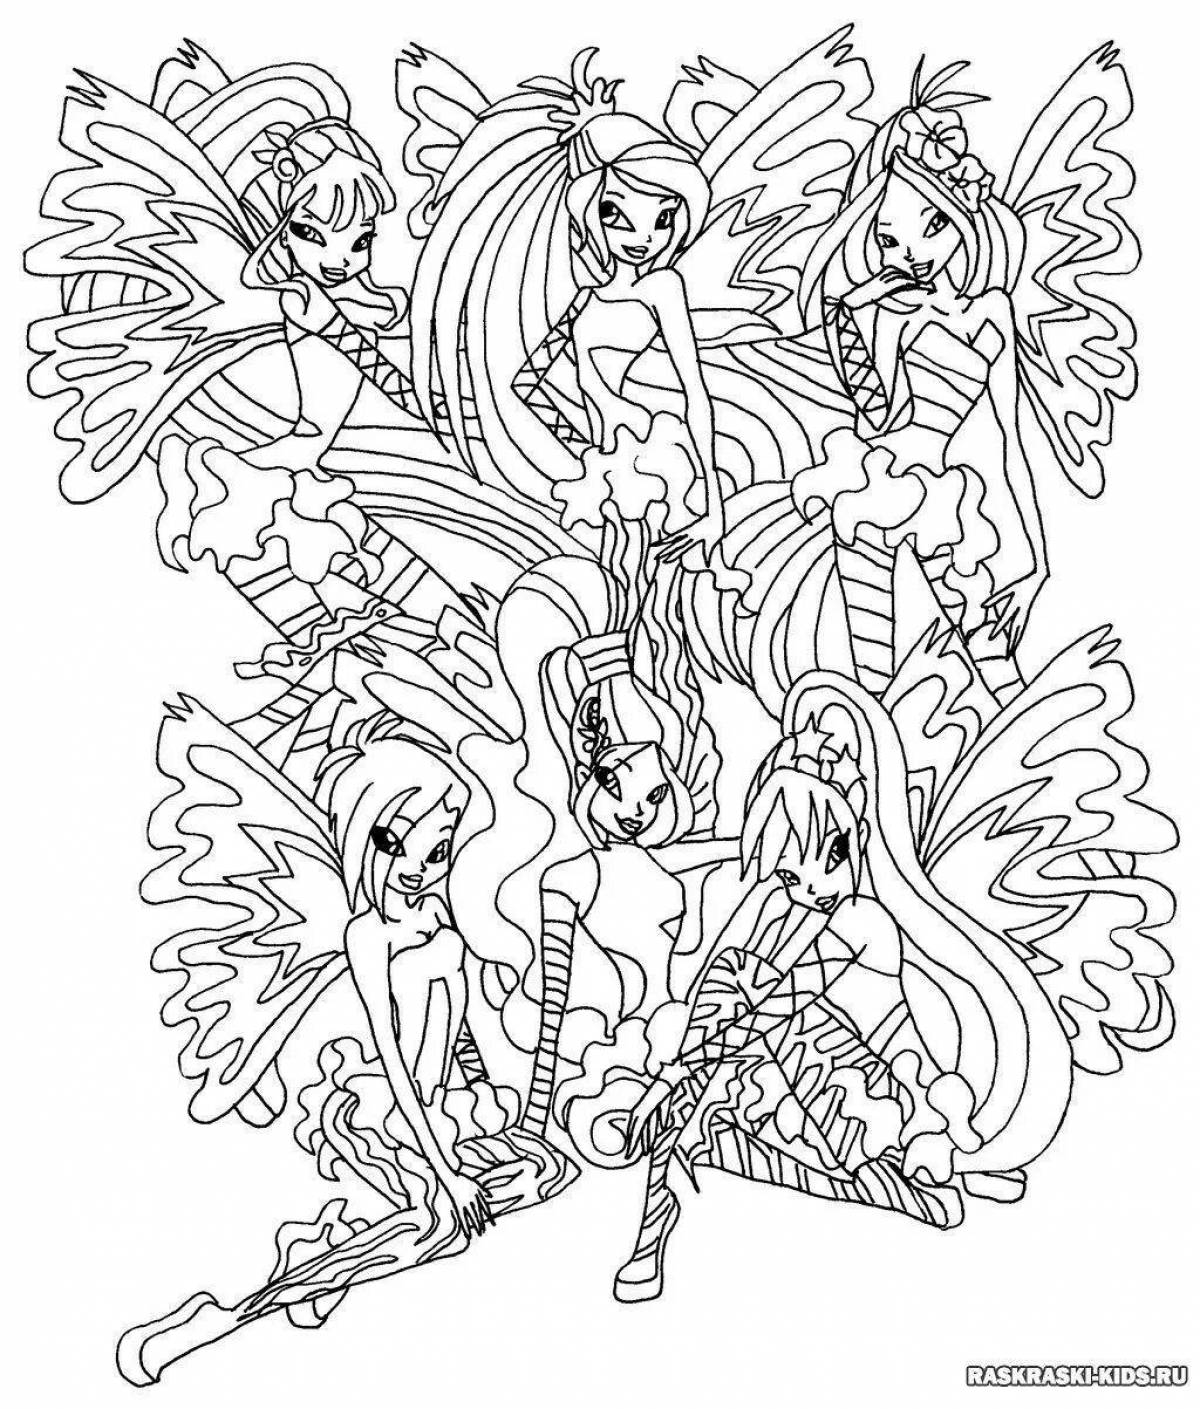 Winx glamor coloring all together